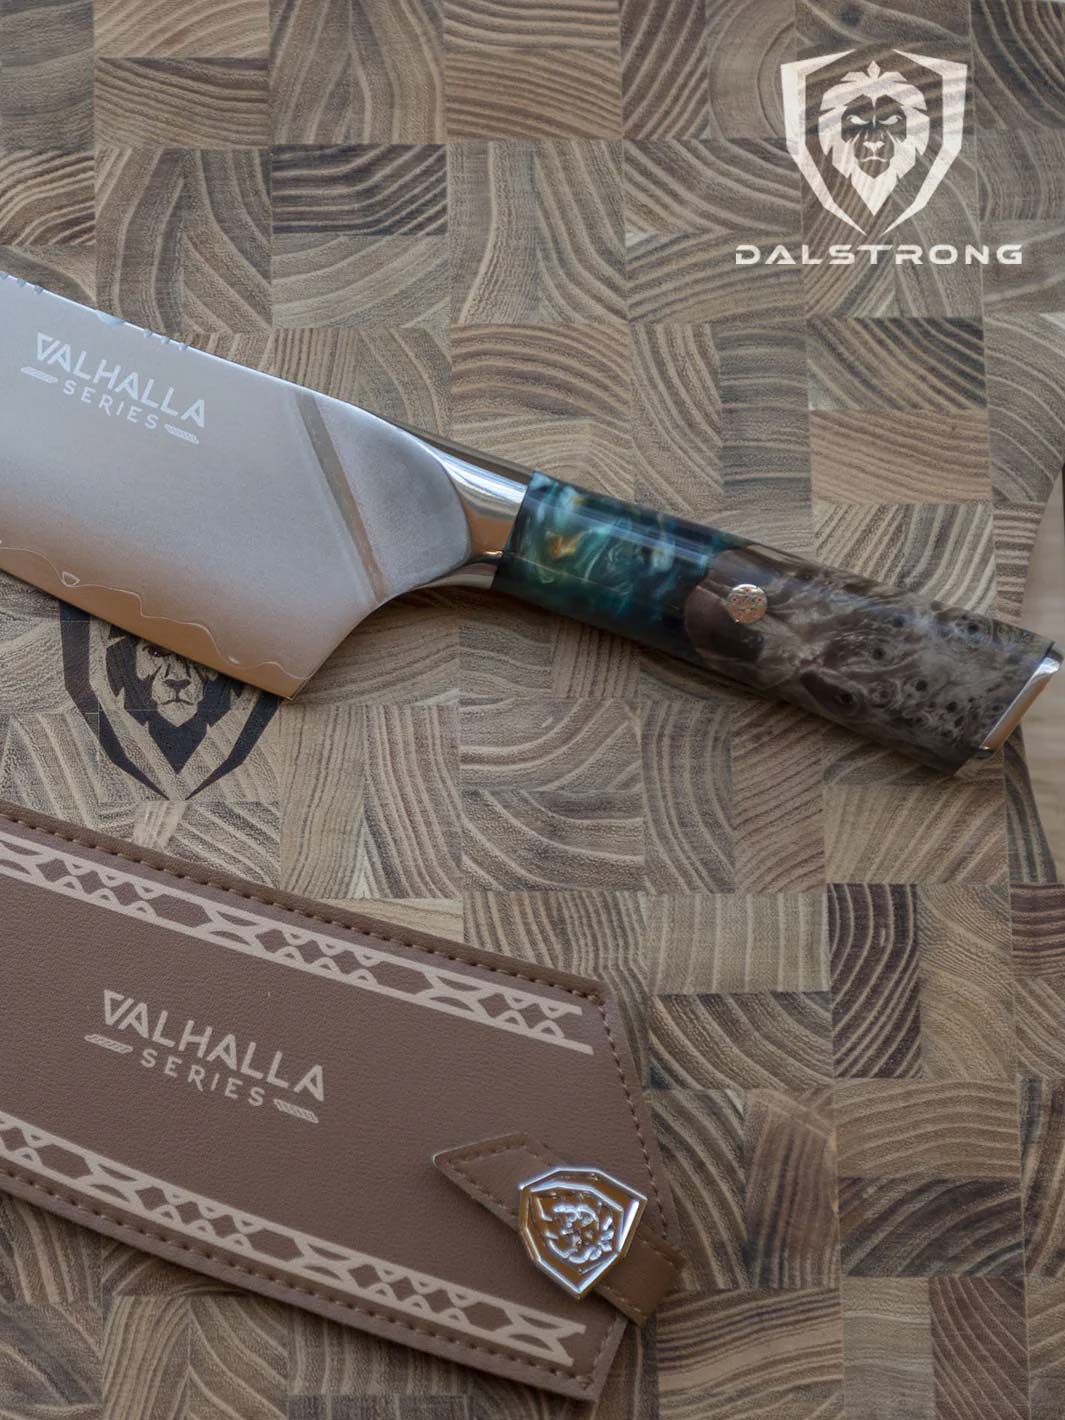 Dalstrong valhalla series 9.5 inch chef knife with wooden handle and sheath on a cutting board.